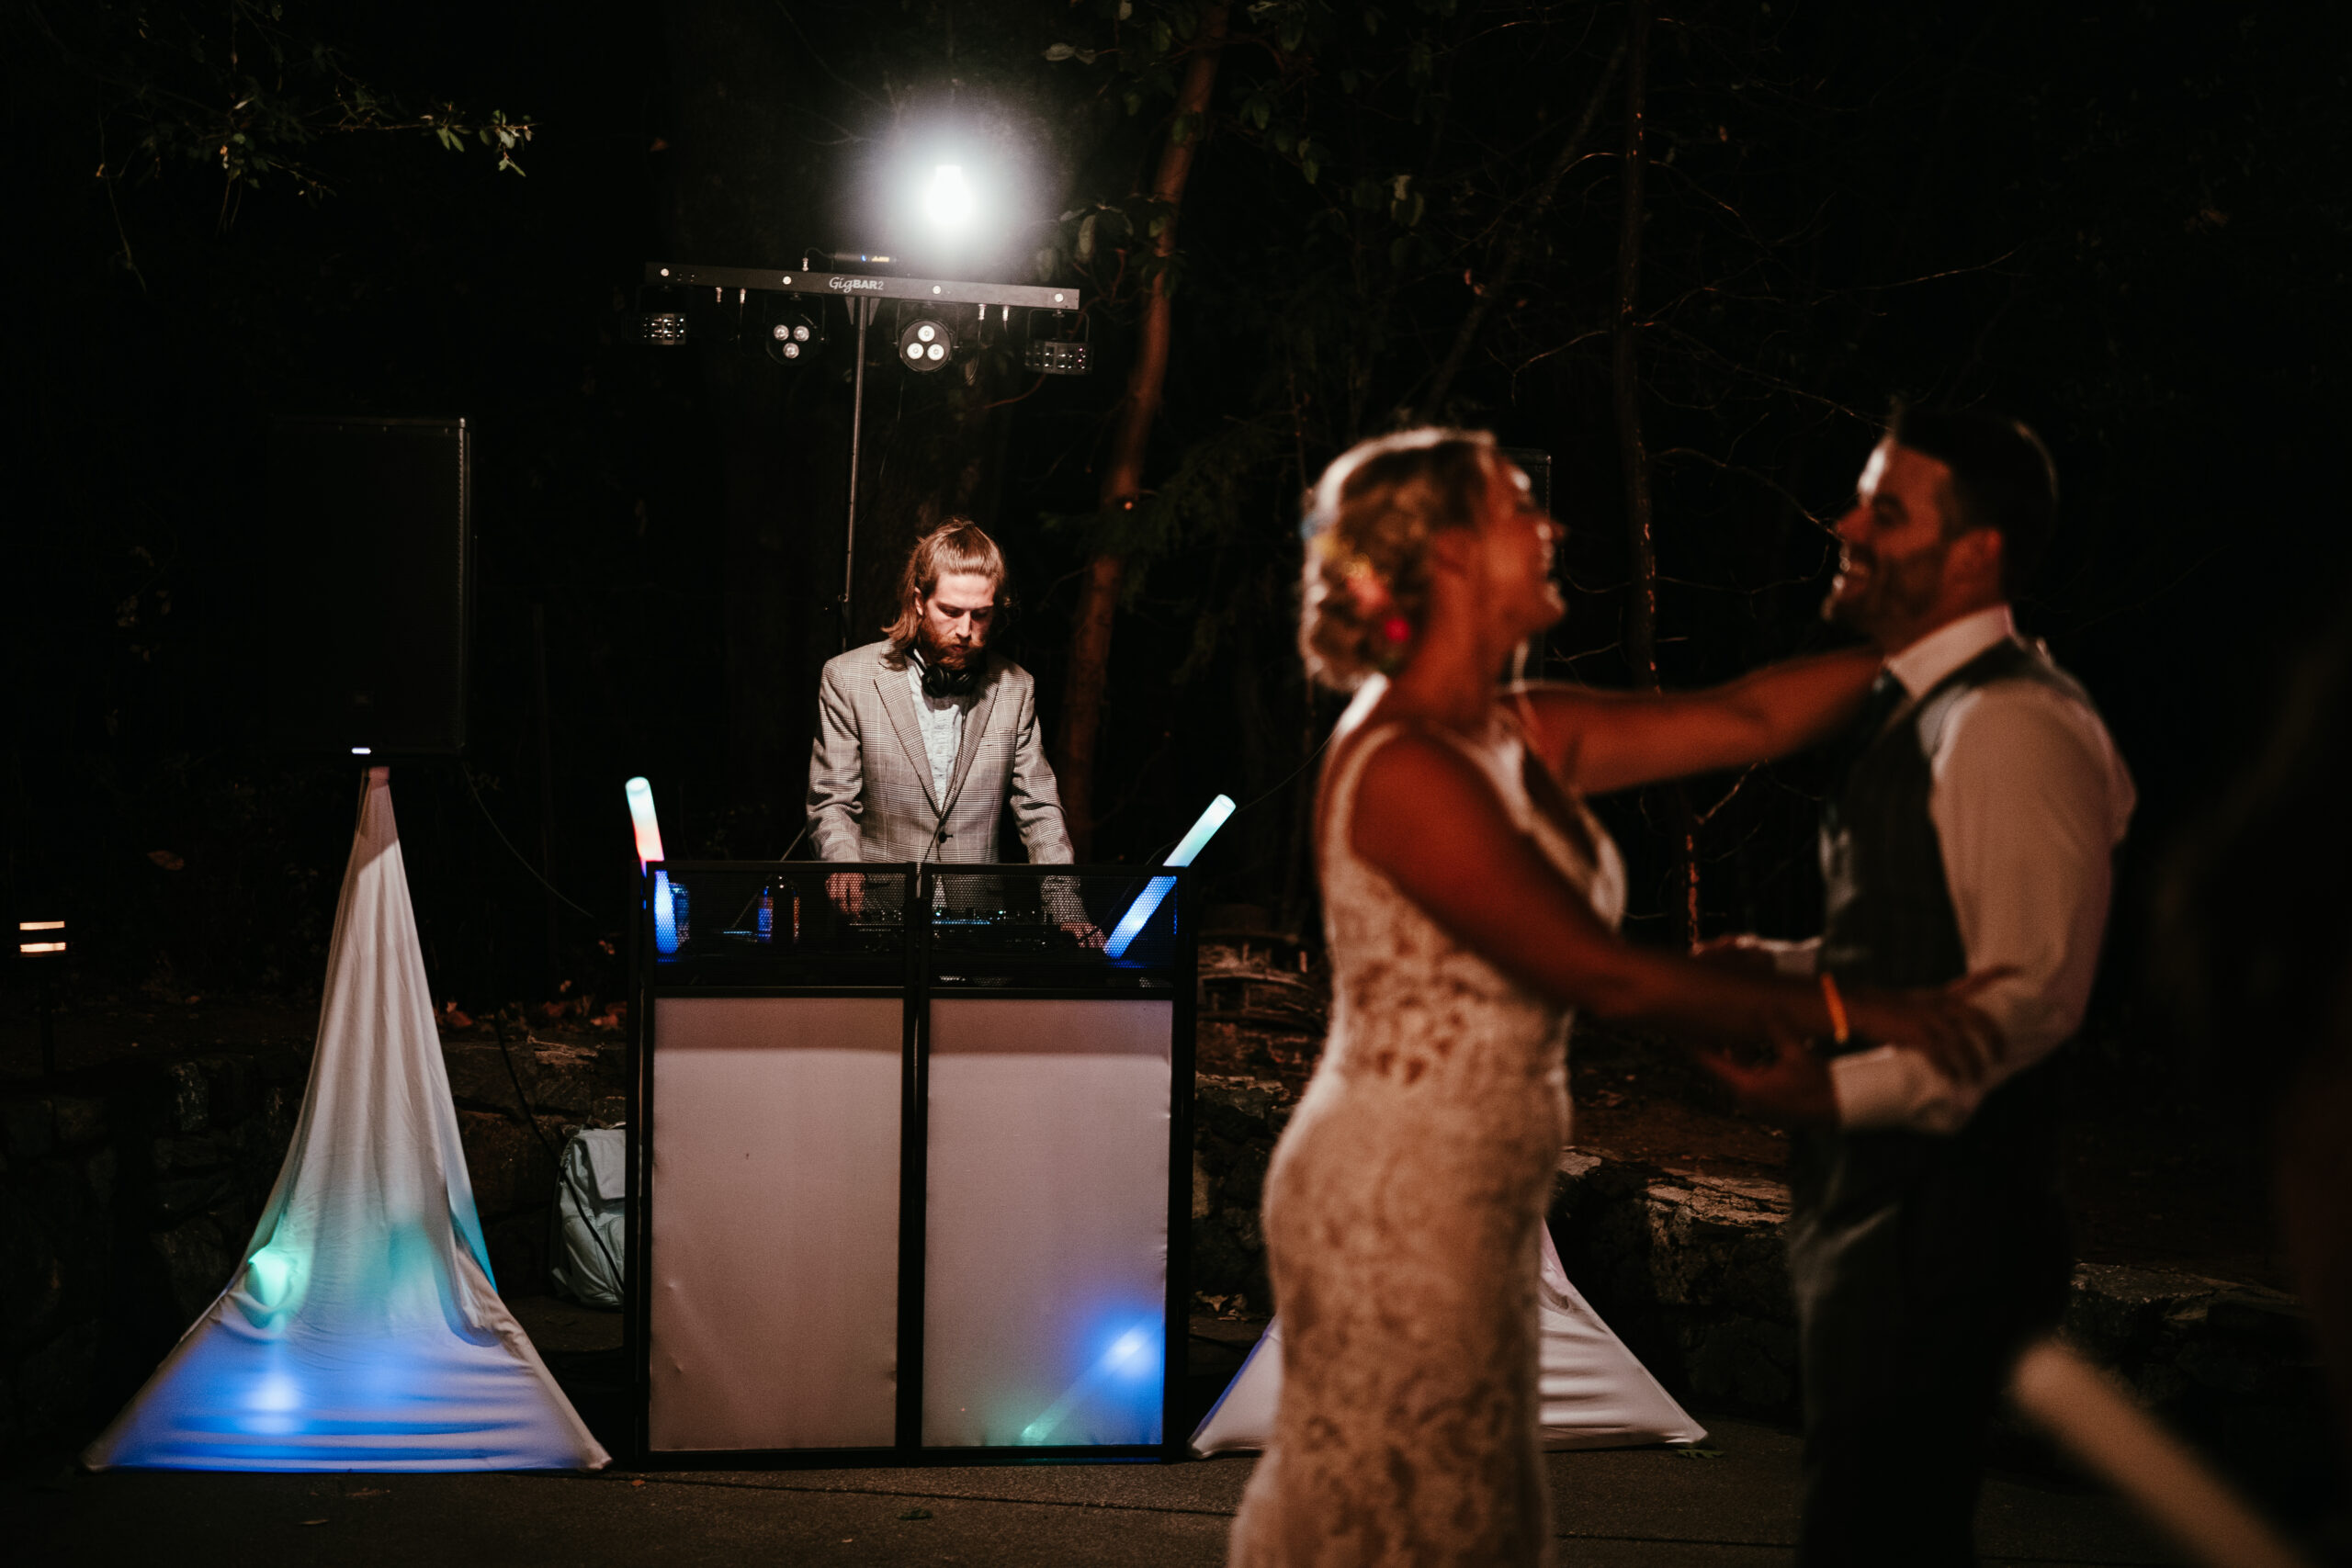 Wedding dj playing music during couples first dance